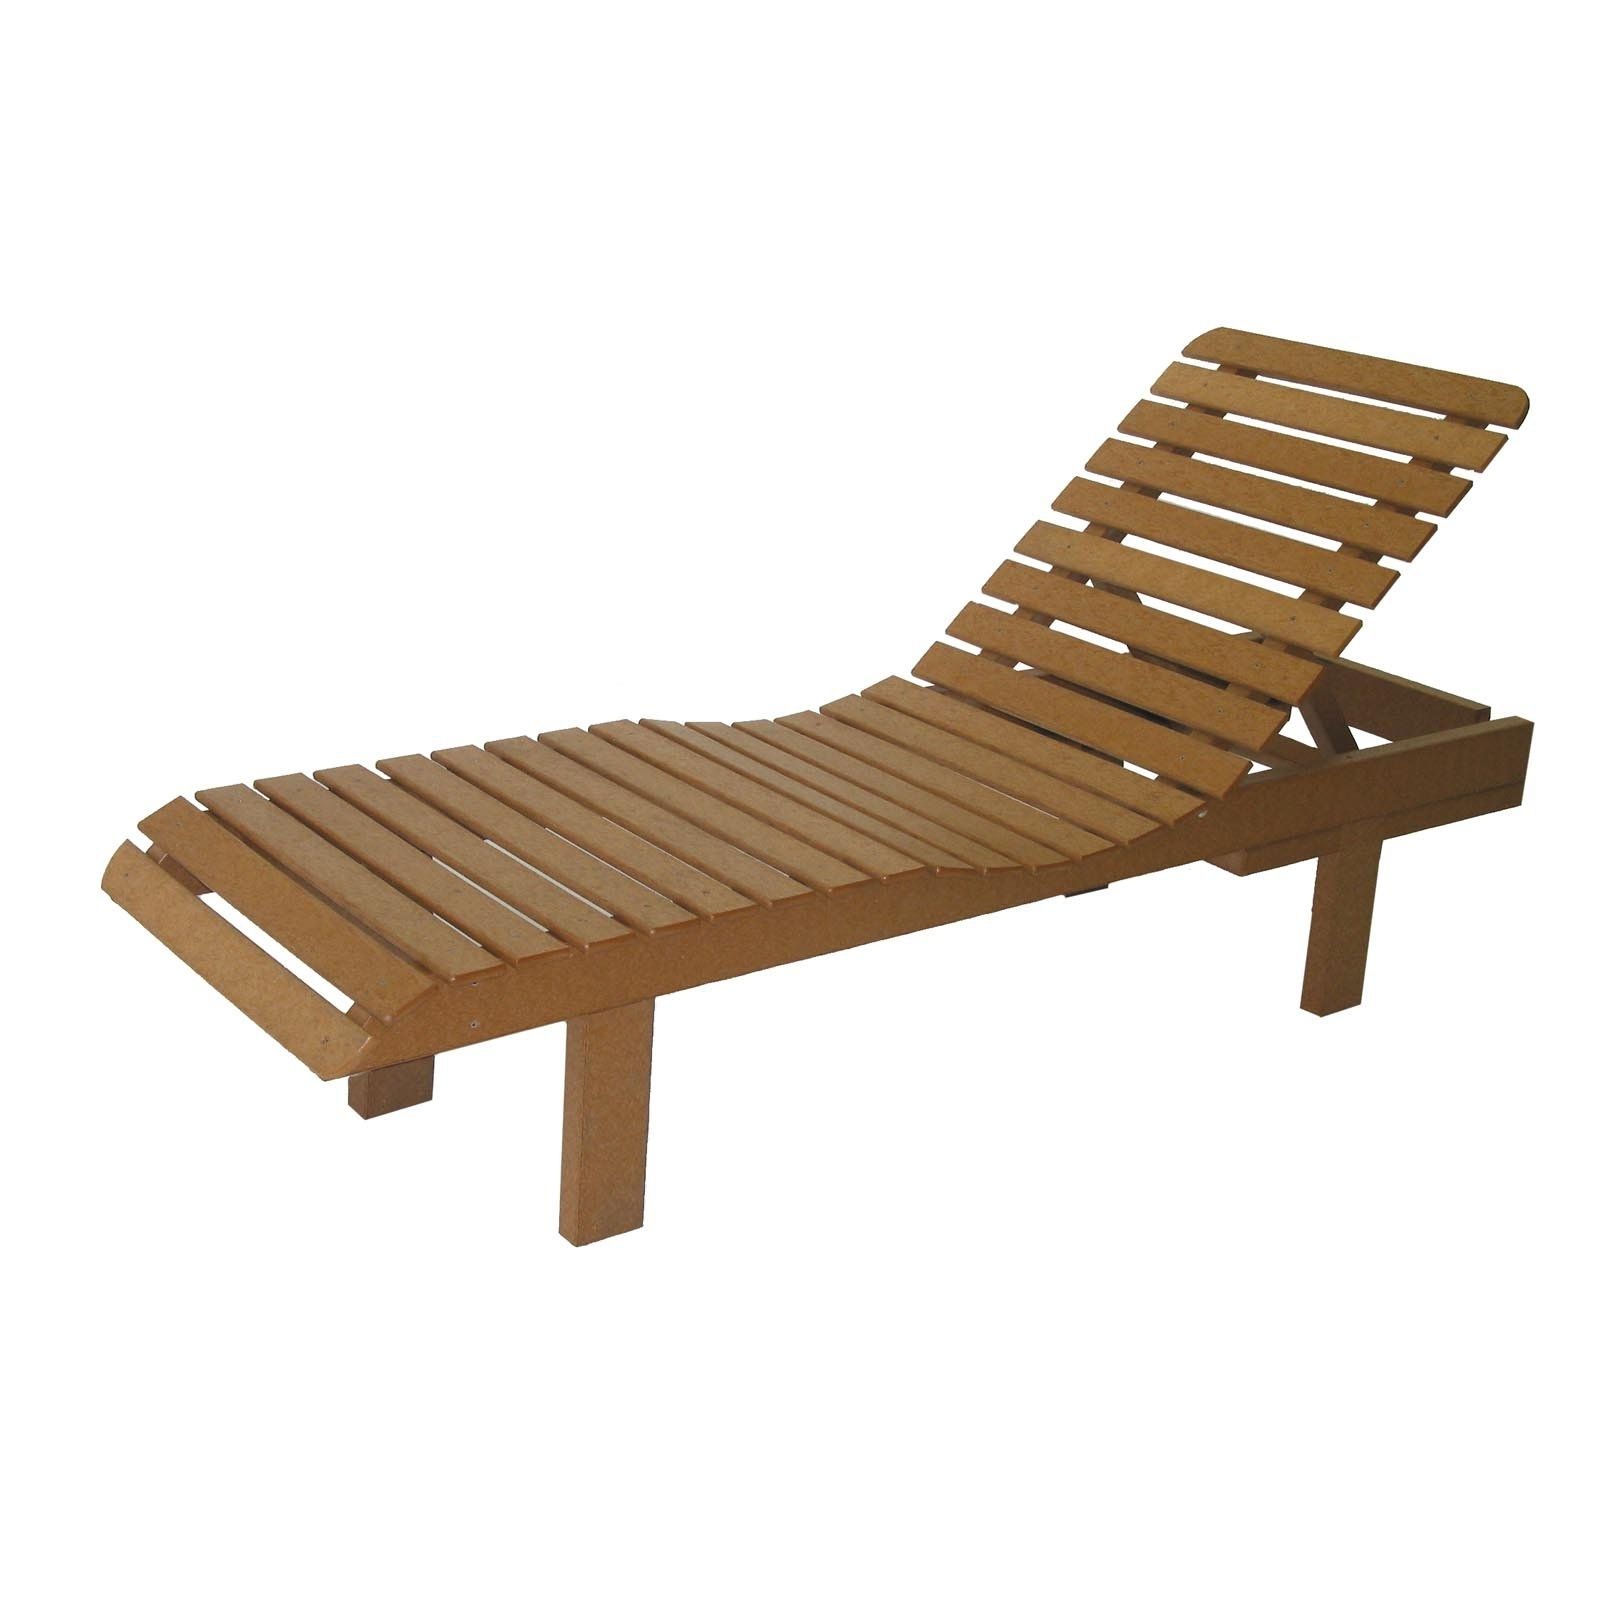 Wood Chaise Lounge Chairs With Regard To Fashionable Wooden Beach Chaise Lounge Chairs Best House Design : Design Beach (View 11 of 15)